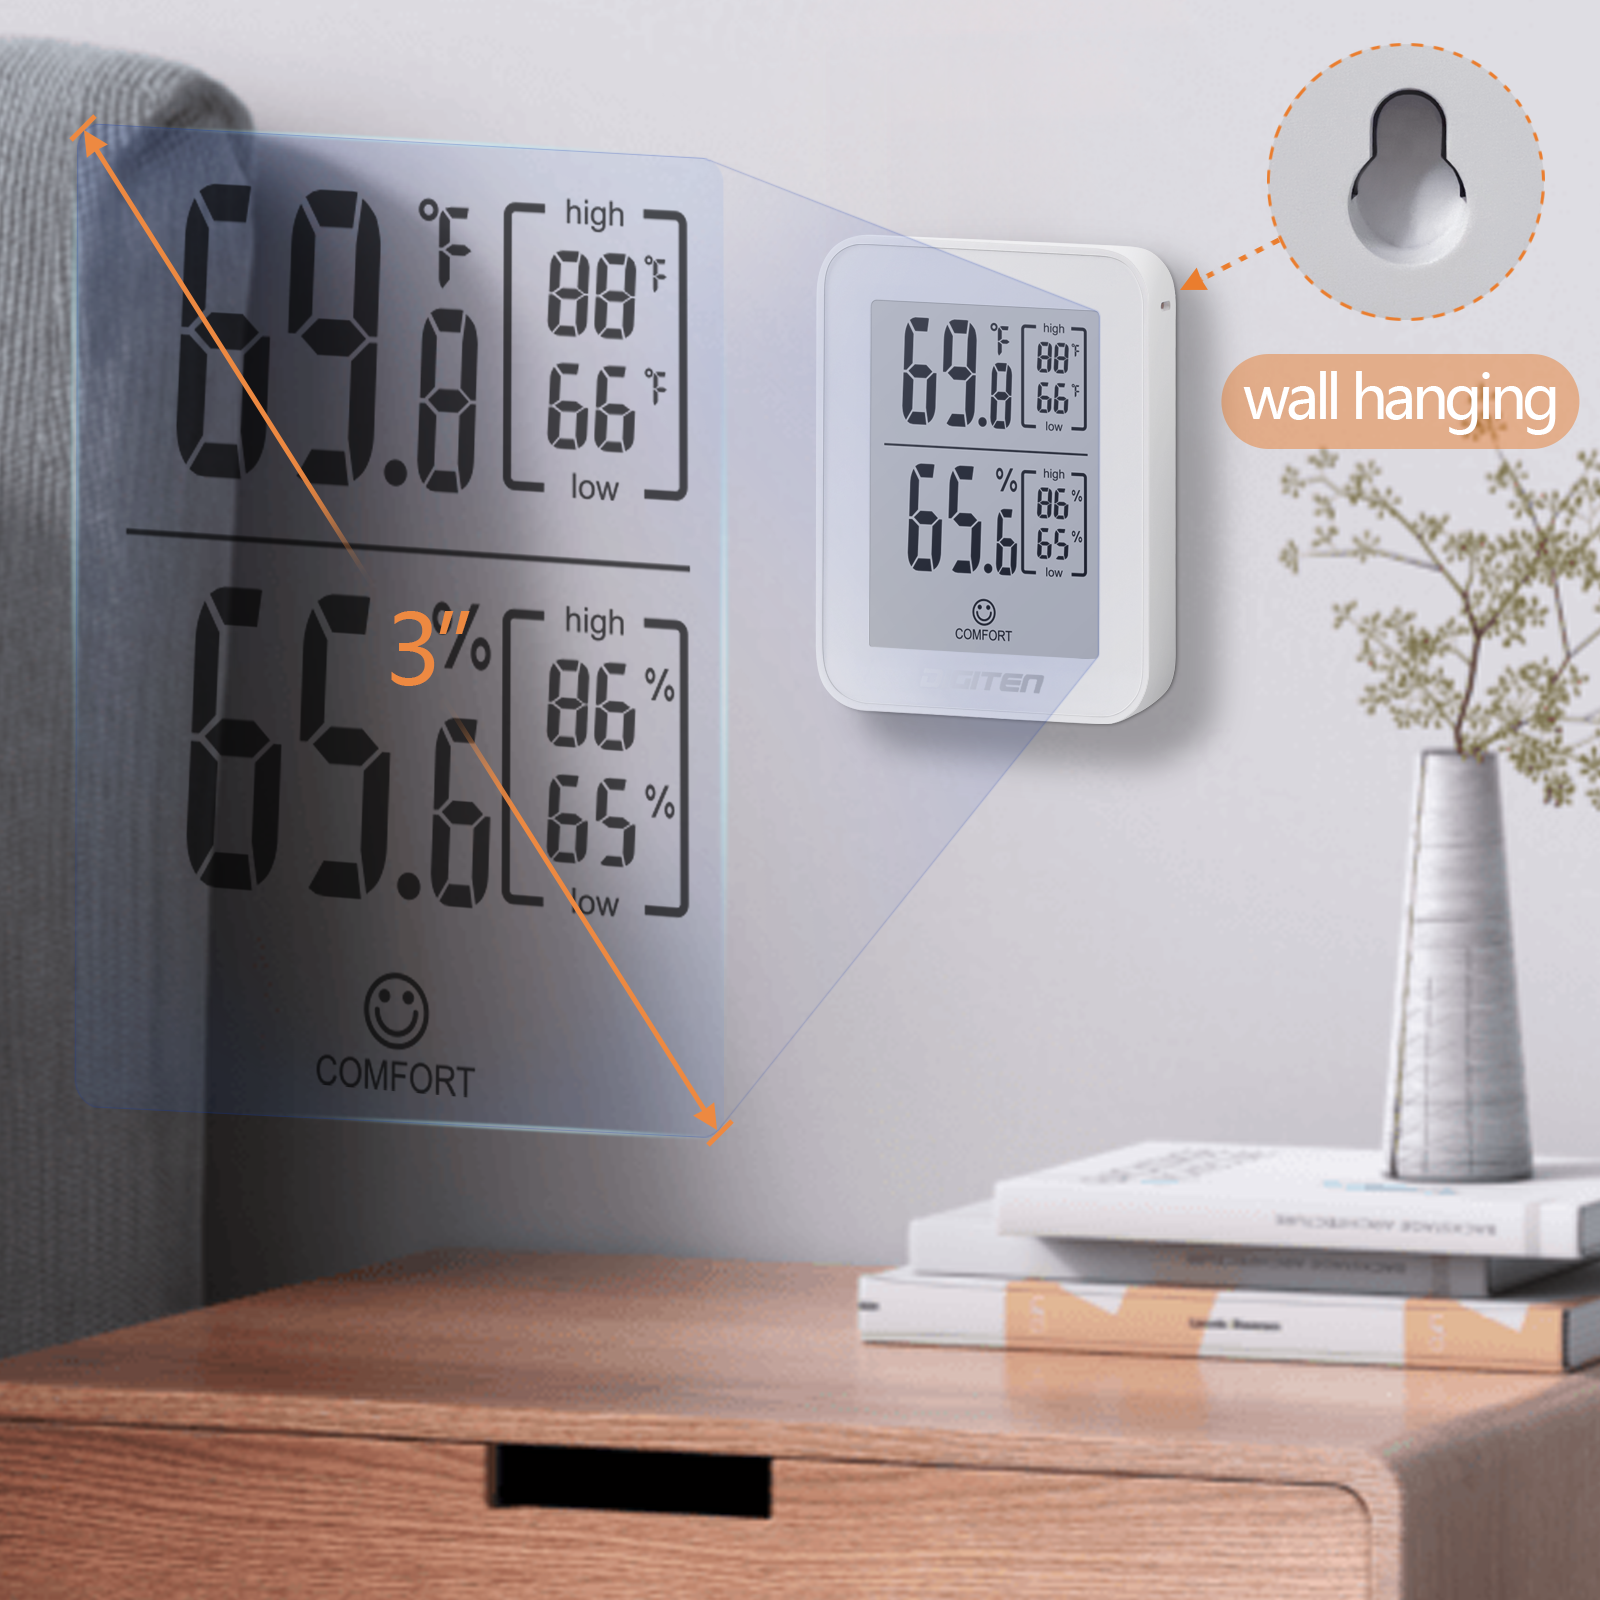 Mini LCD Digital Thermometer Hygrometer Indoor Room Electronic Temperature  Humidity Meter Sensor Gauge Weather Station For Home.Hygrometer  Thermometer, Smart Humidity Meter, Indoor Room Thermometer For Home  Greenhouse, Hight Accurate Temperature Sensor